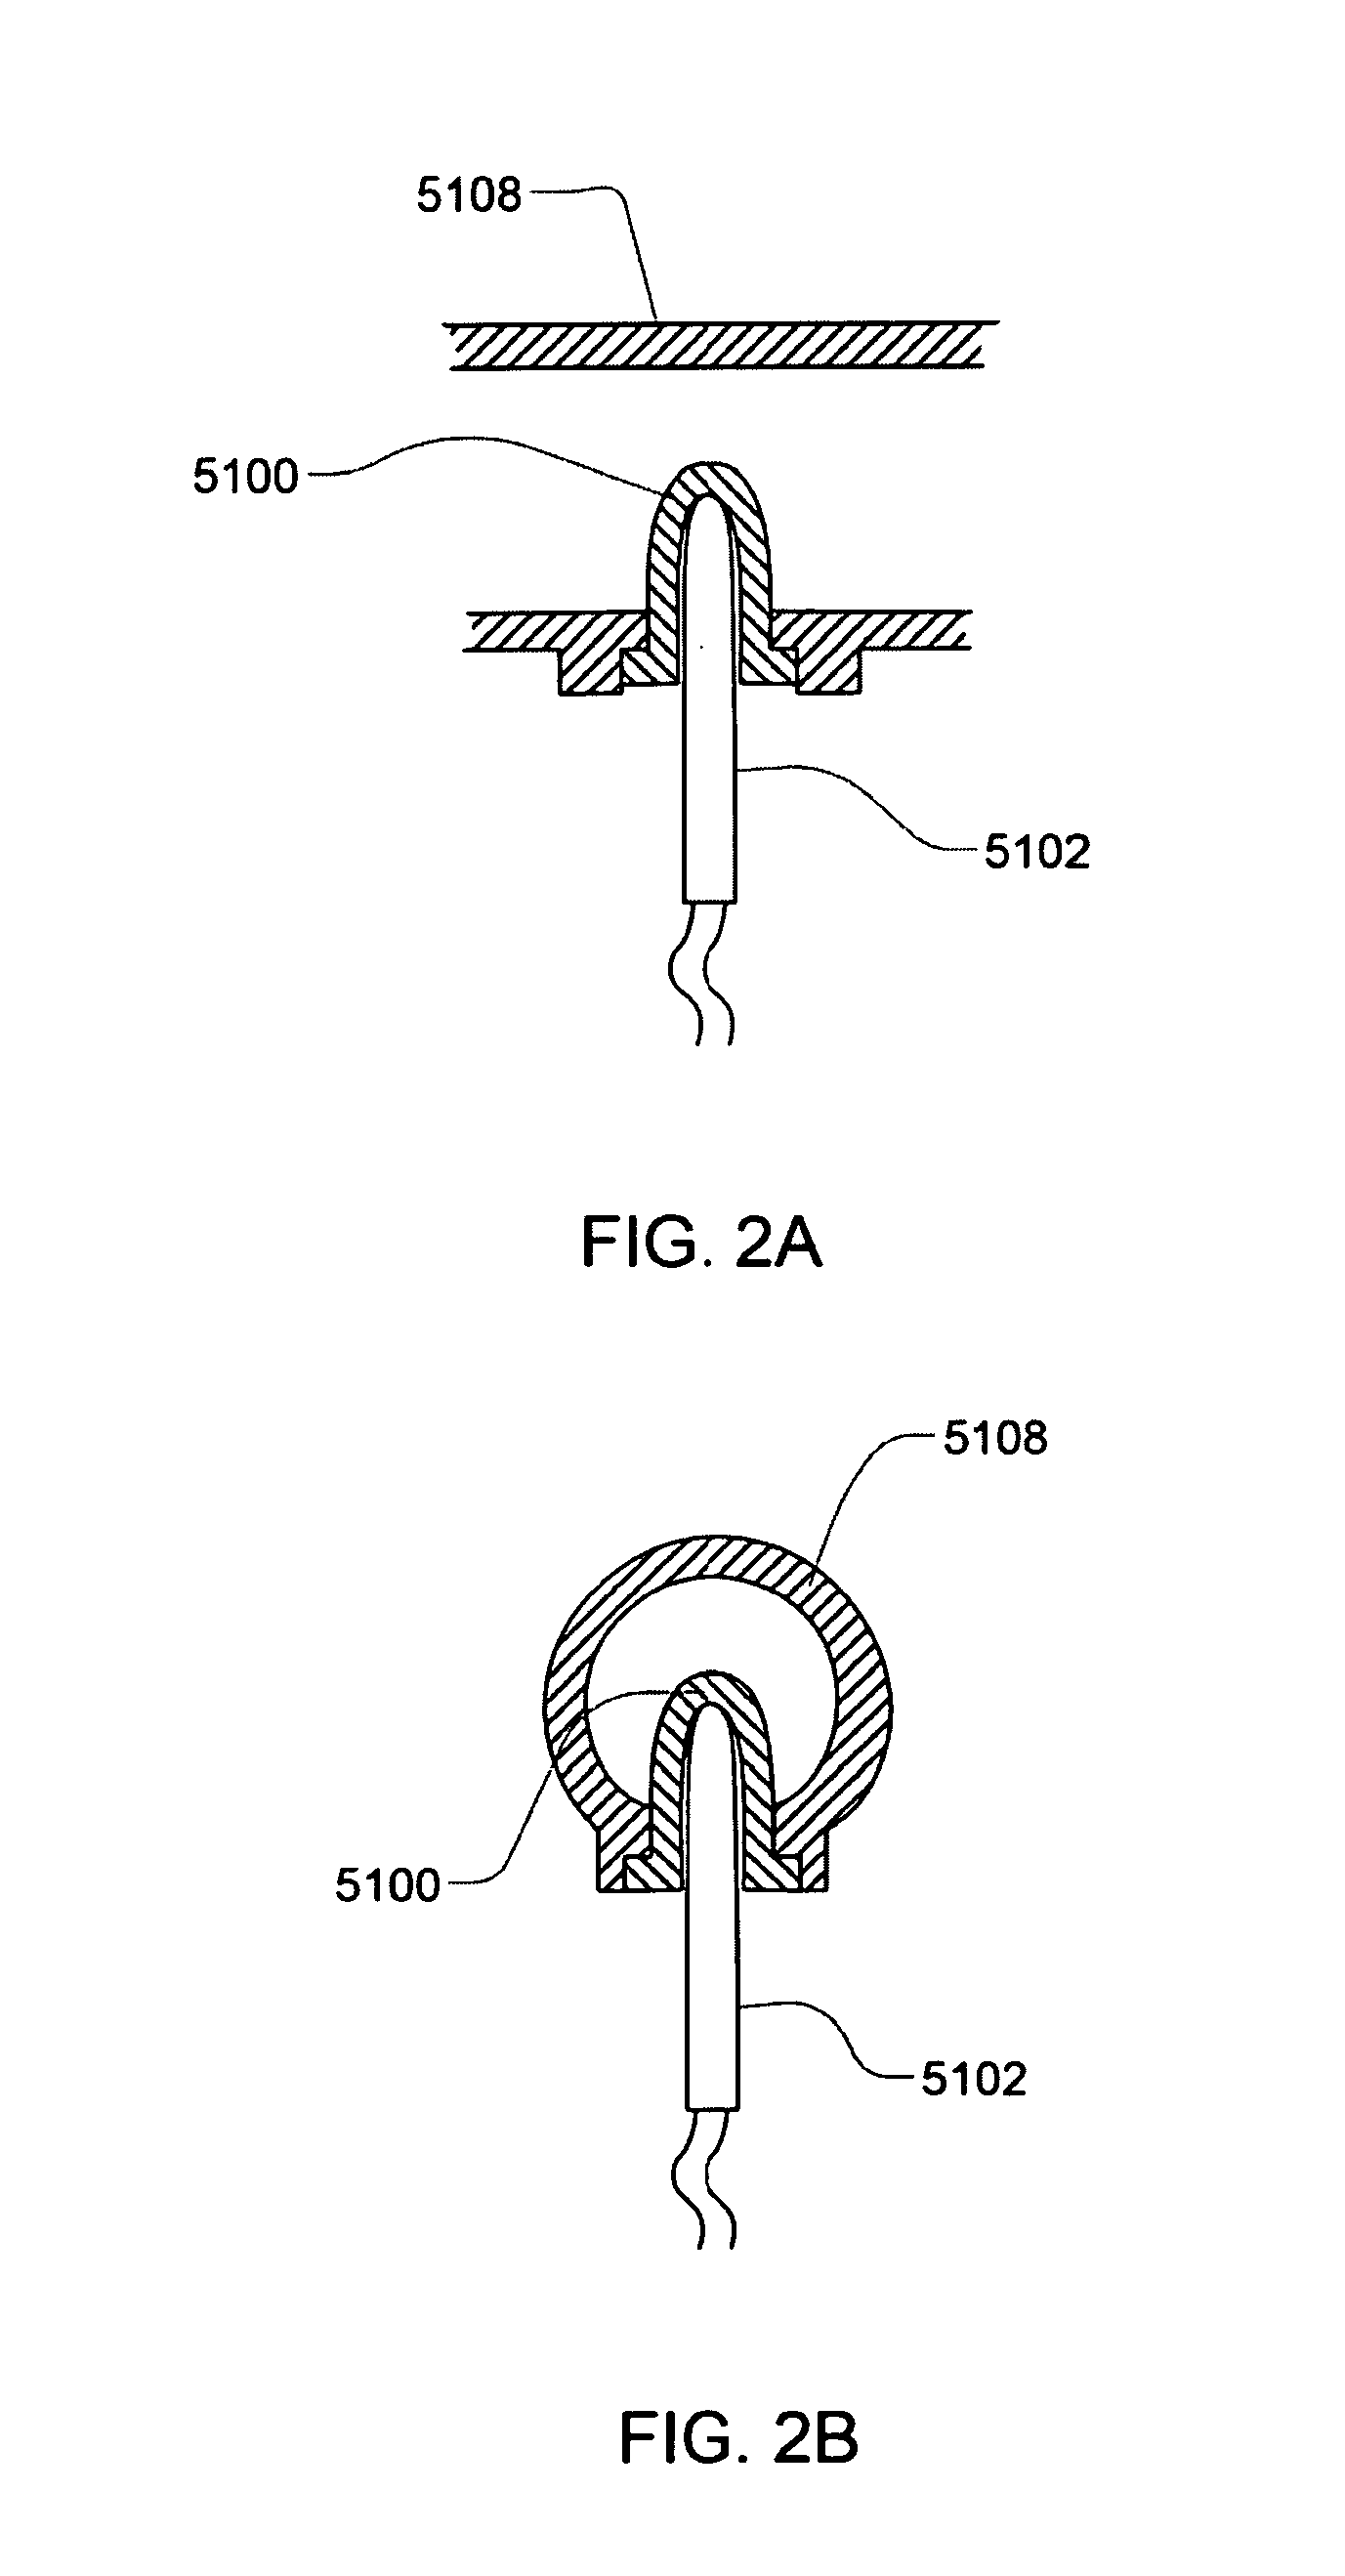 Sensor Apparatus Systems, Devices and Methods